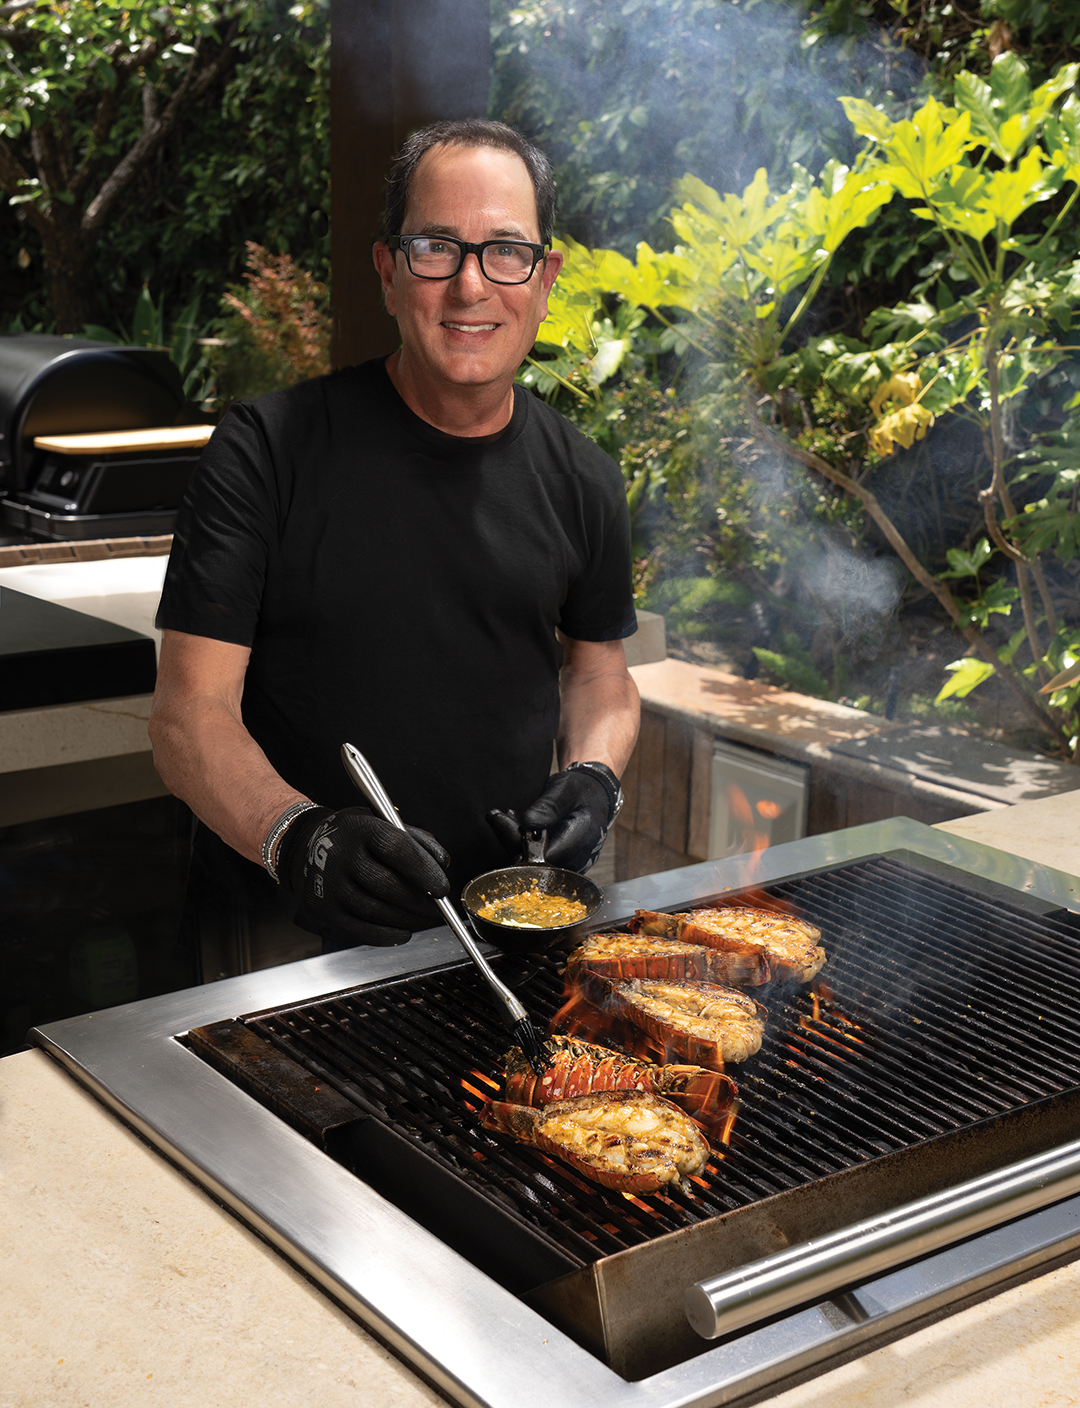 Sensible Spend Ready to cook outdoors? Here are some do's and don'ts for  cleaning and seasoning your grill - The San Diego Union-Tribune, bbq grill